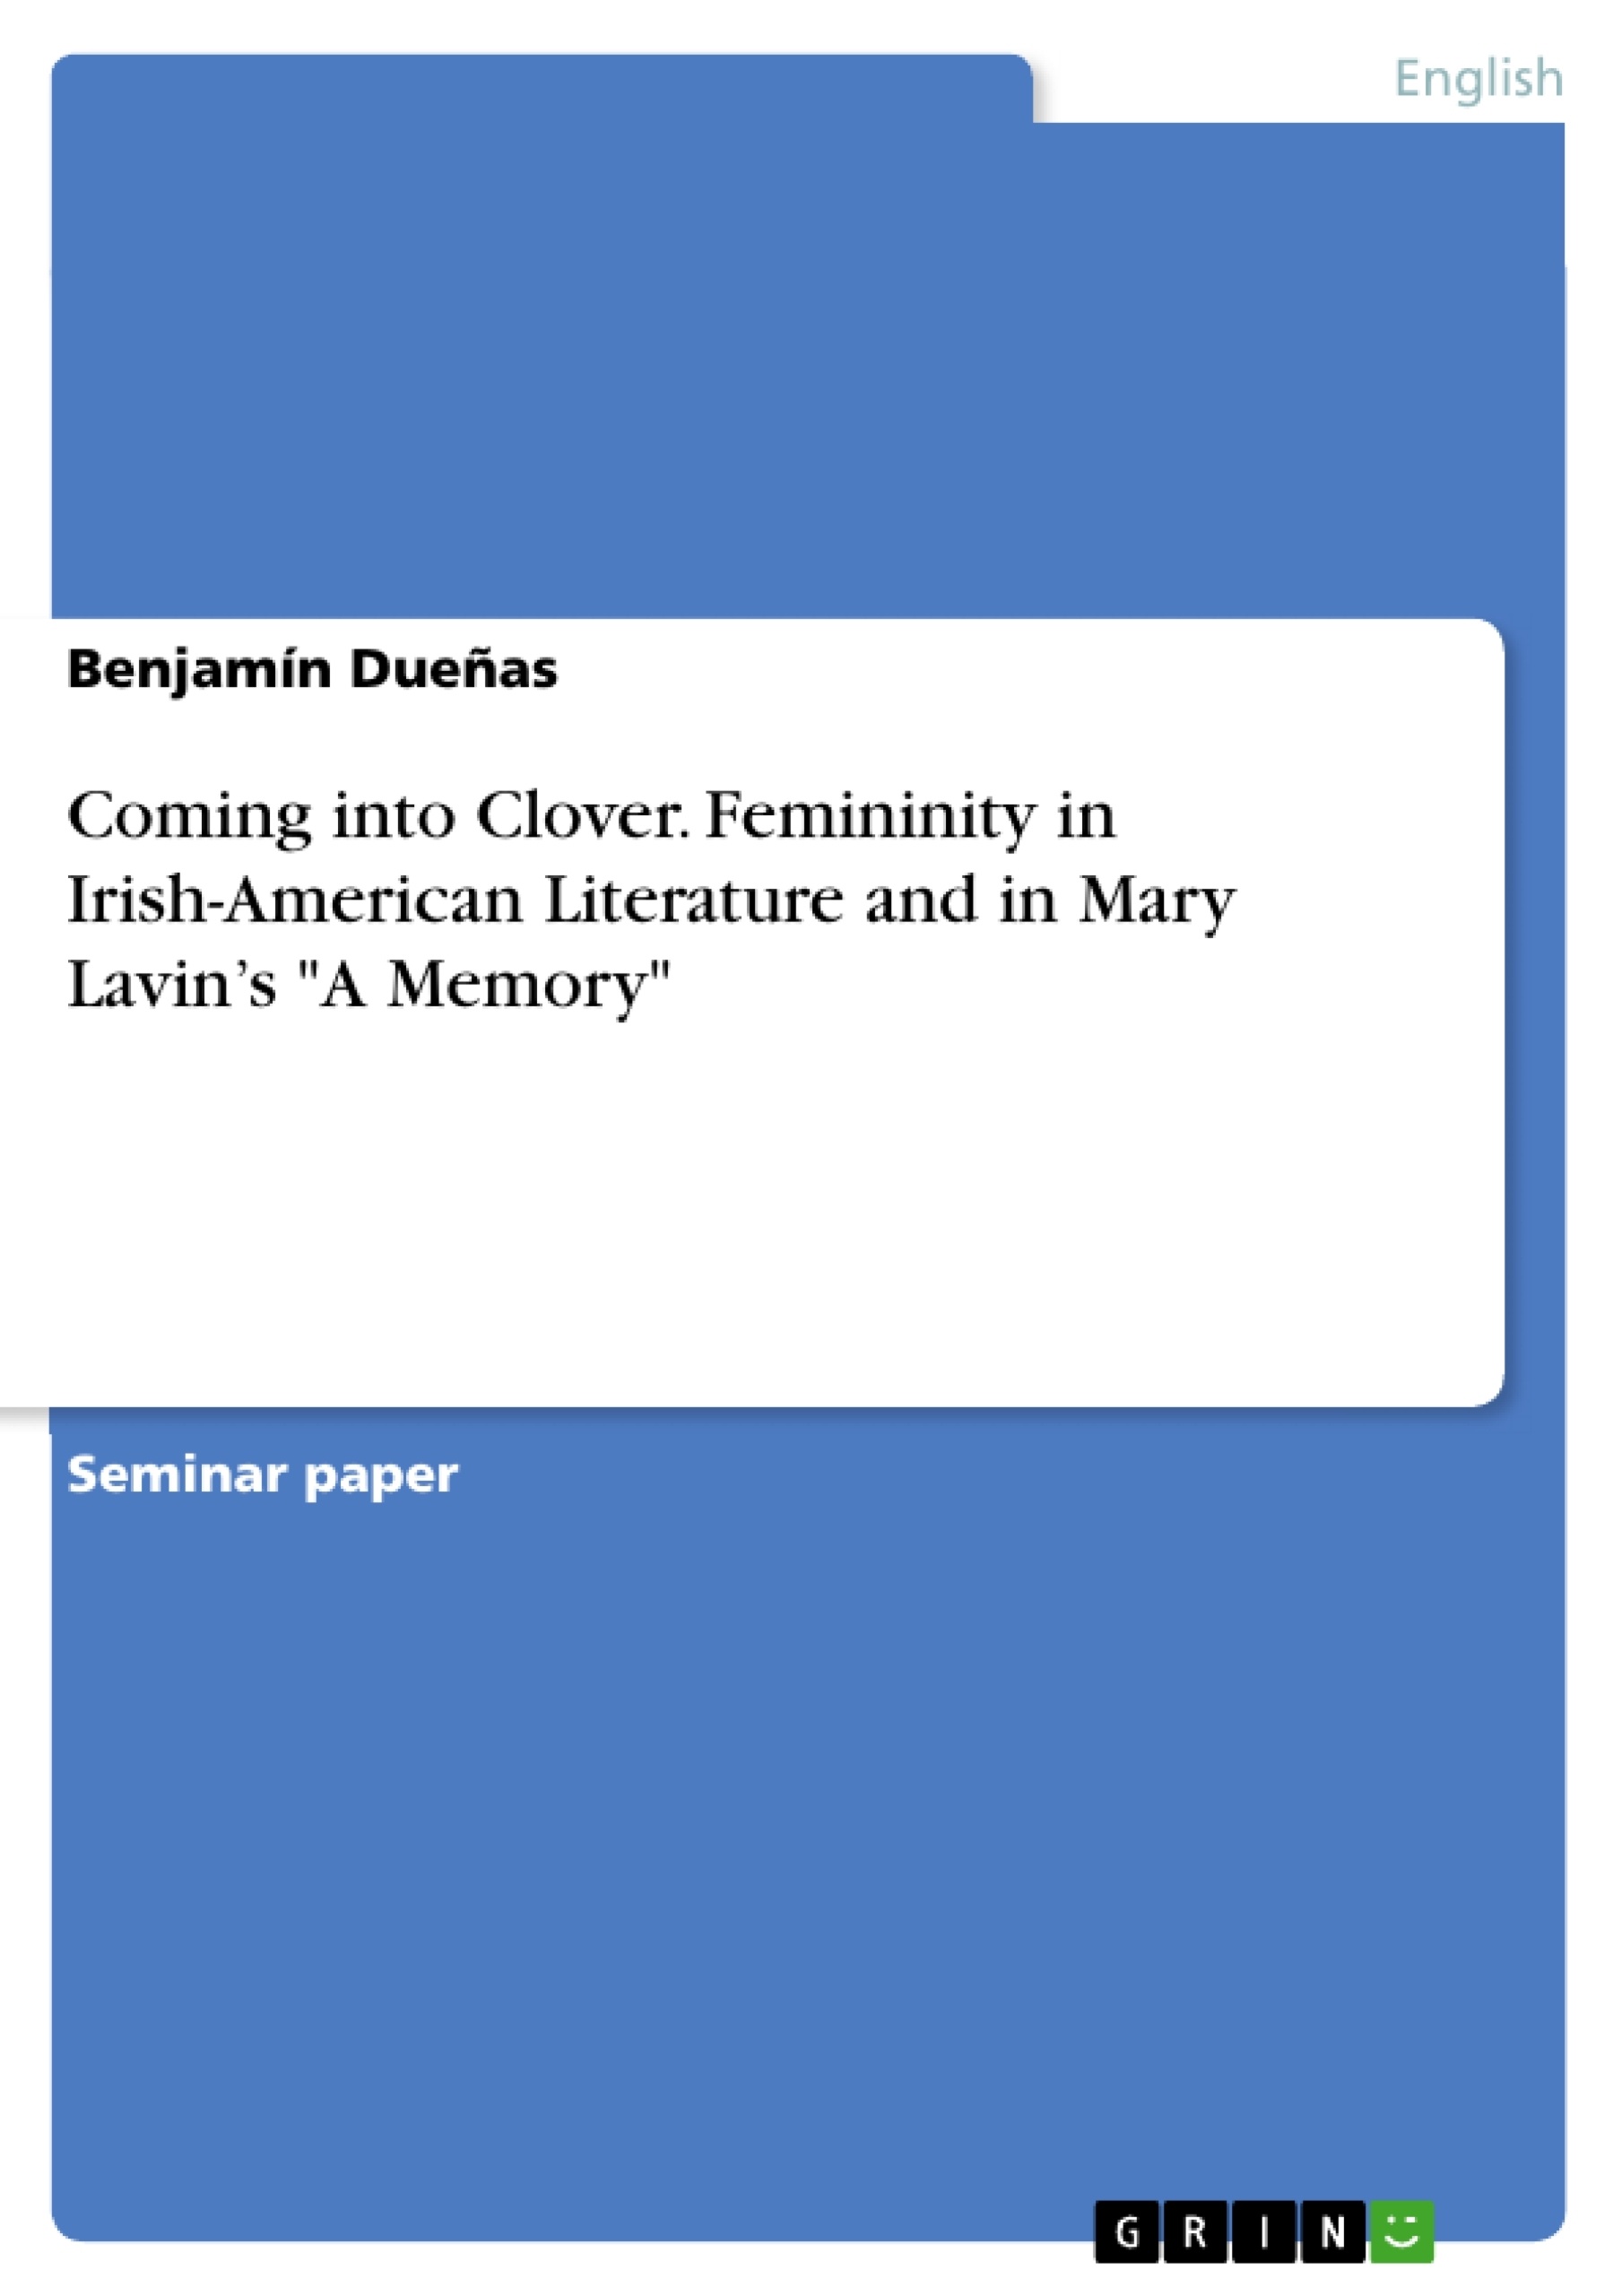 Título: Coming into Clover. Femininity in Irish-American Literature and in Mary Lavin’s "A Memory"